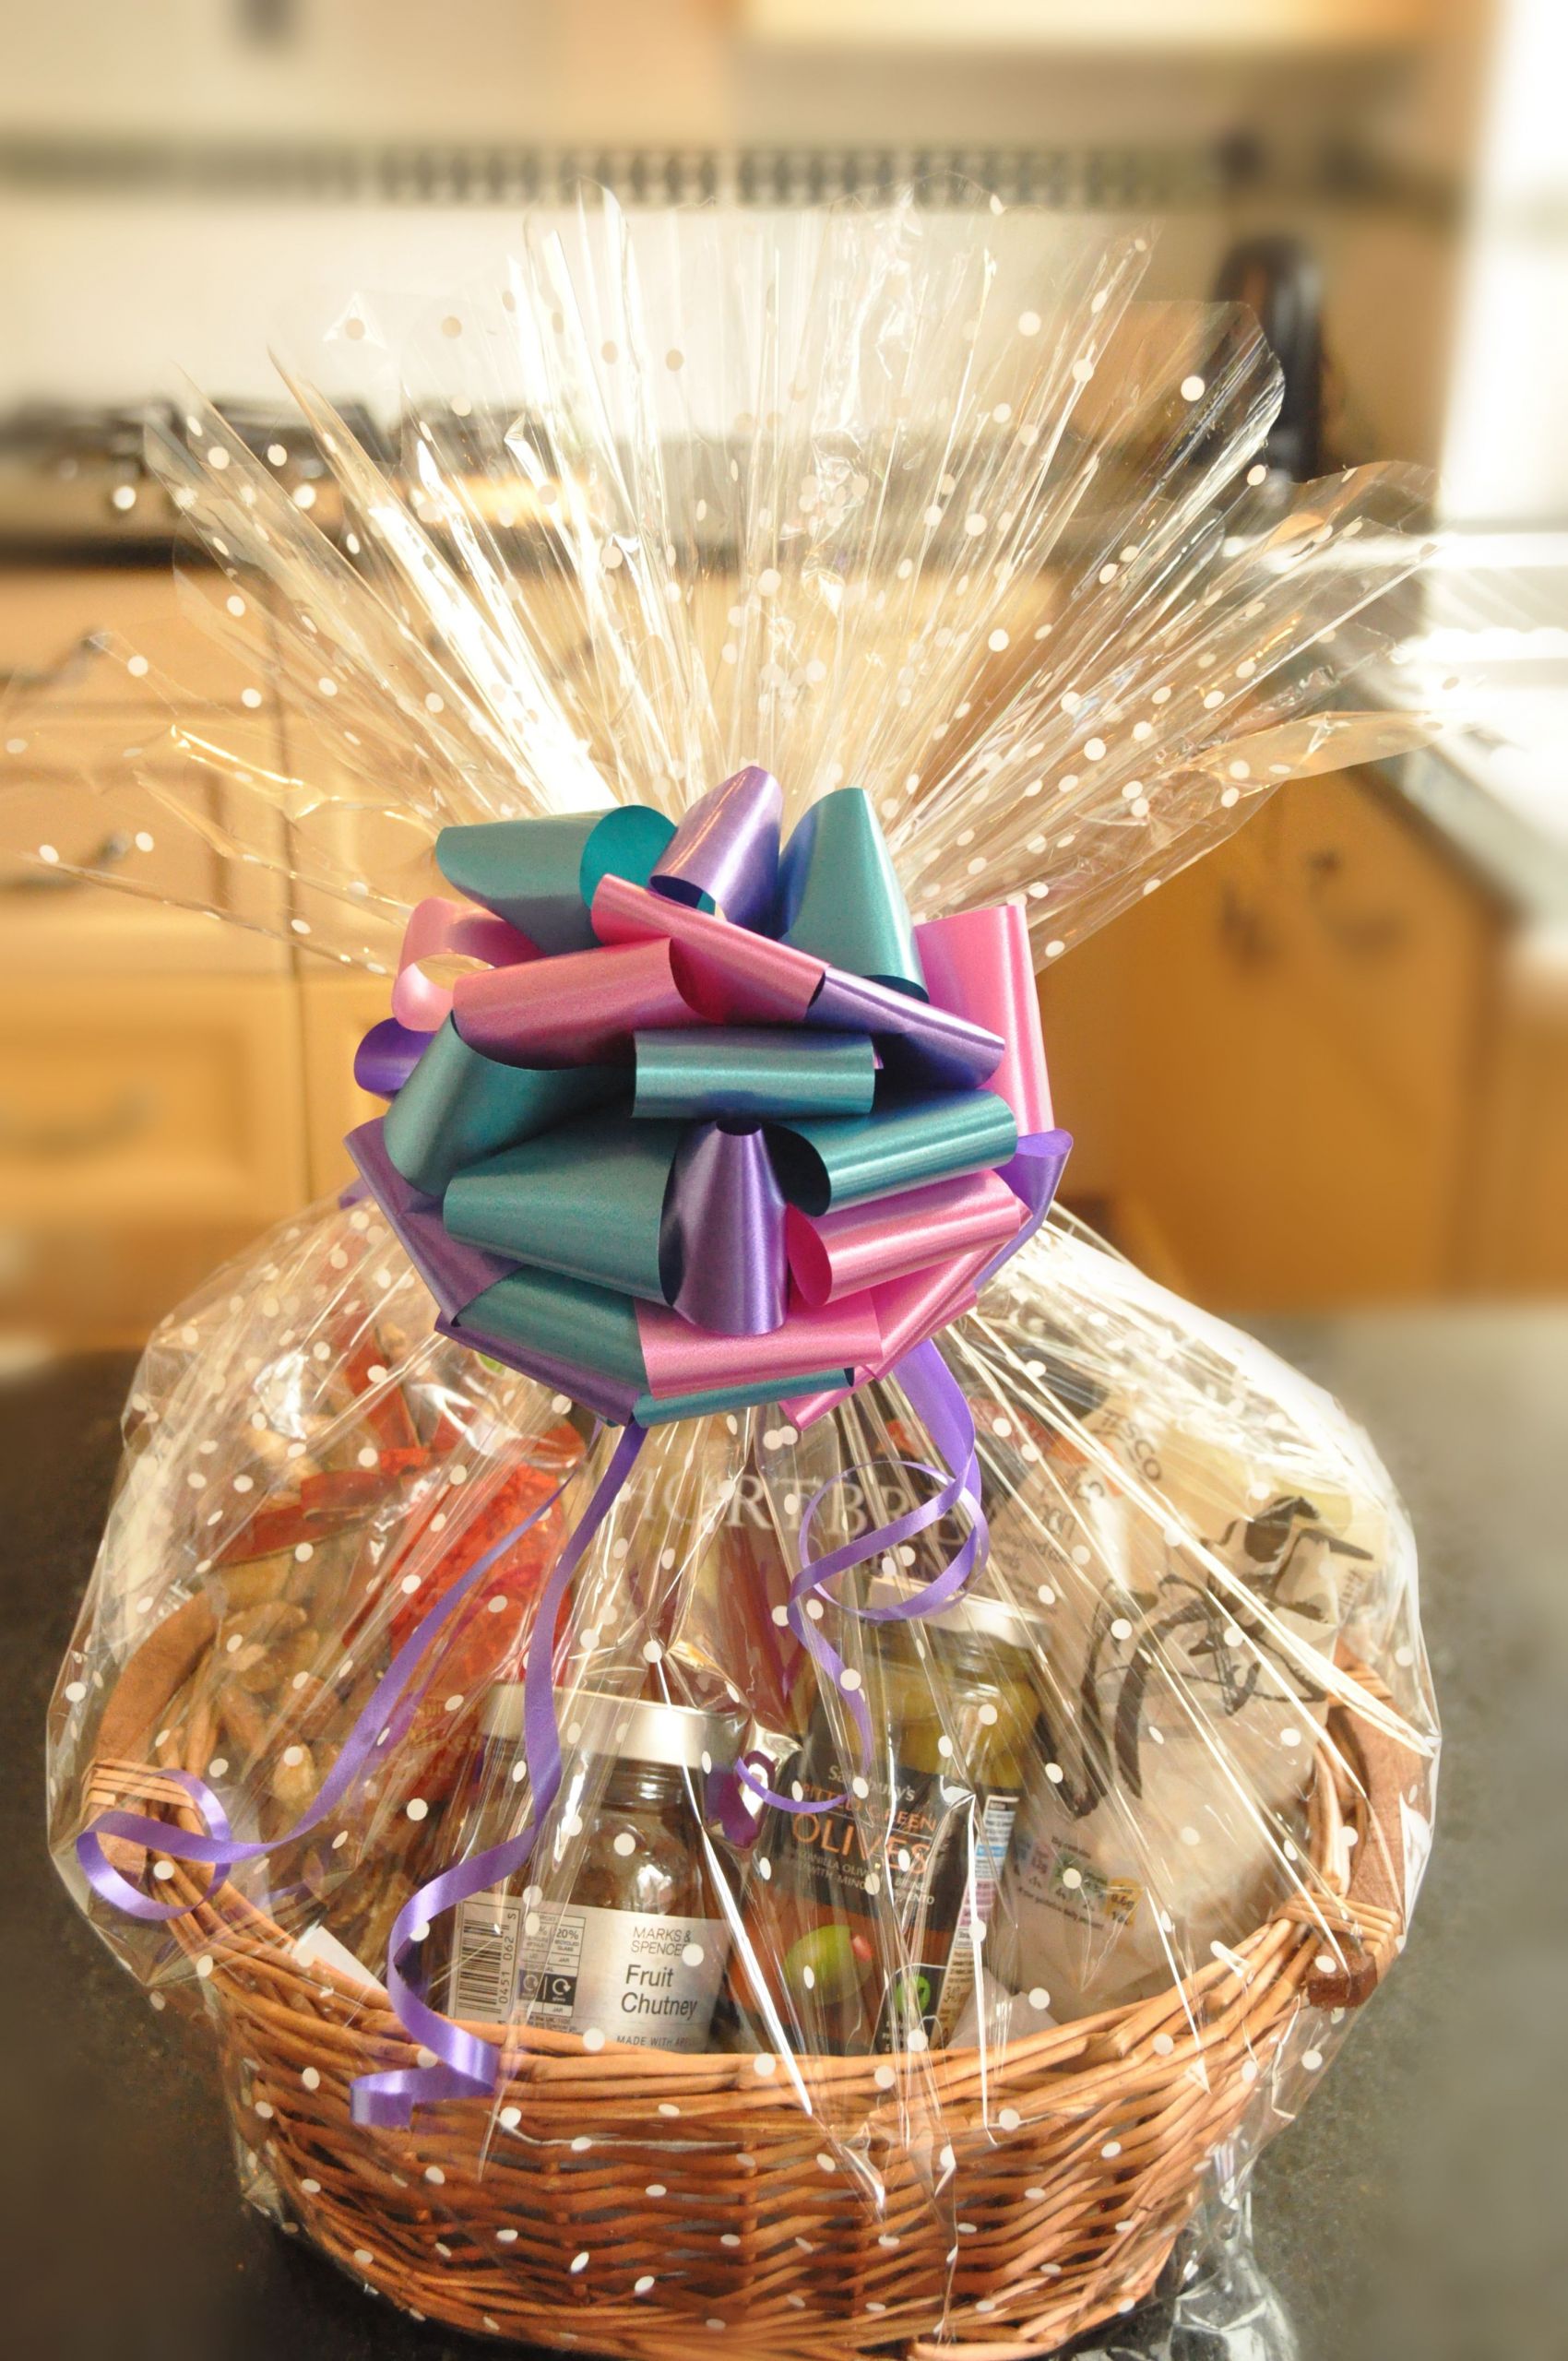 Make Your Own Gift Basket Ideas
 Hampers & t baskets create your own luxury baskets